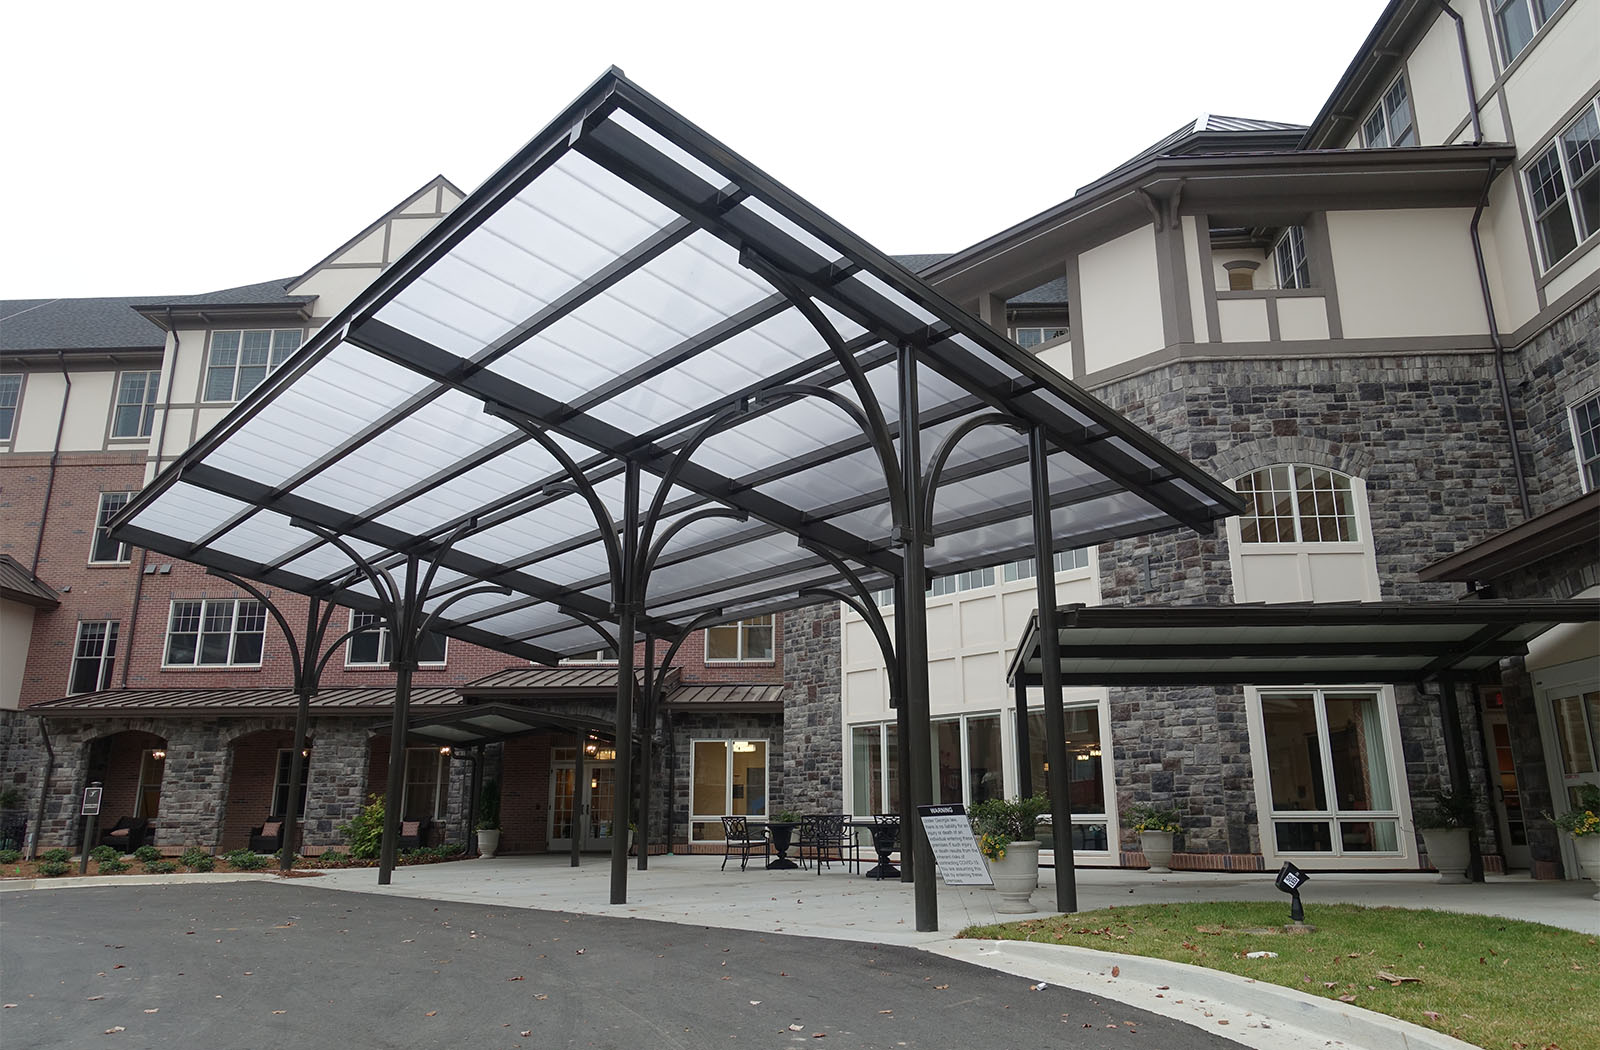 Terraces at Peachtree-63648a-x-Entrance Canopies-Senior Living